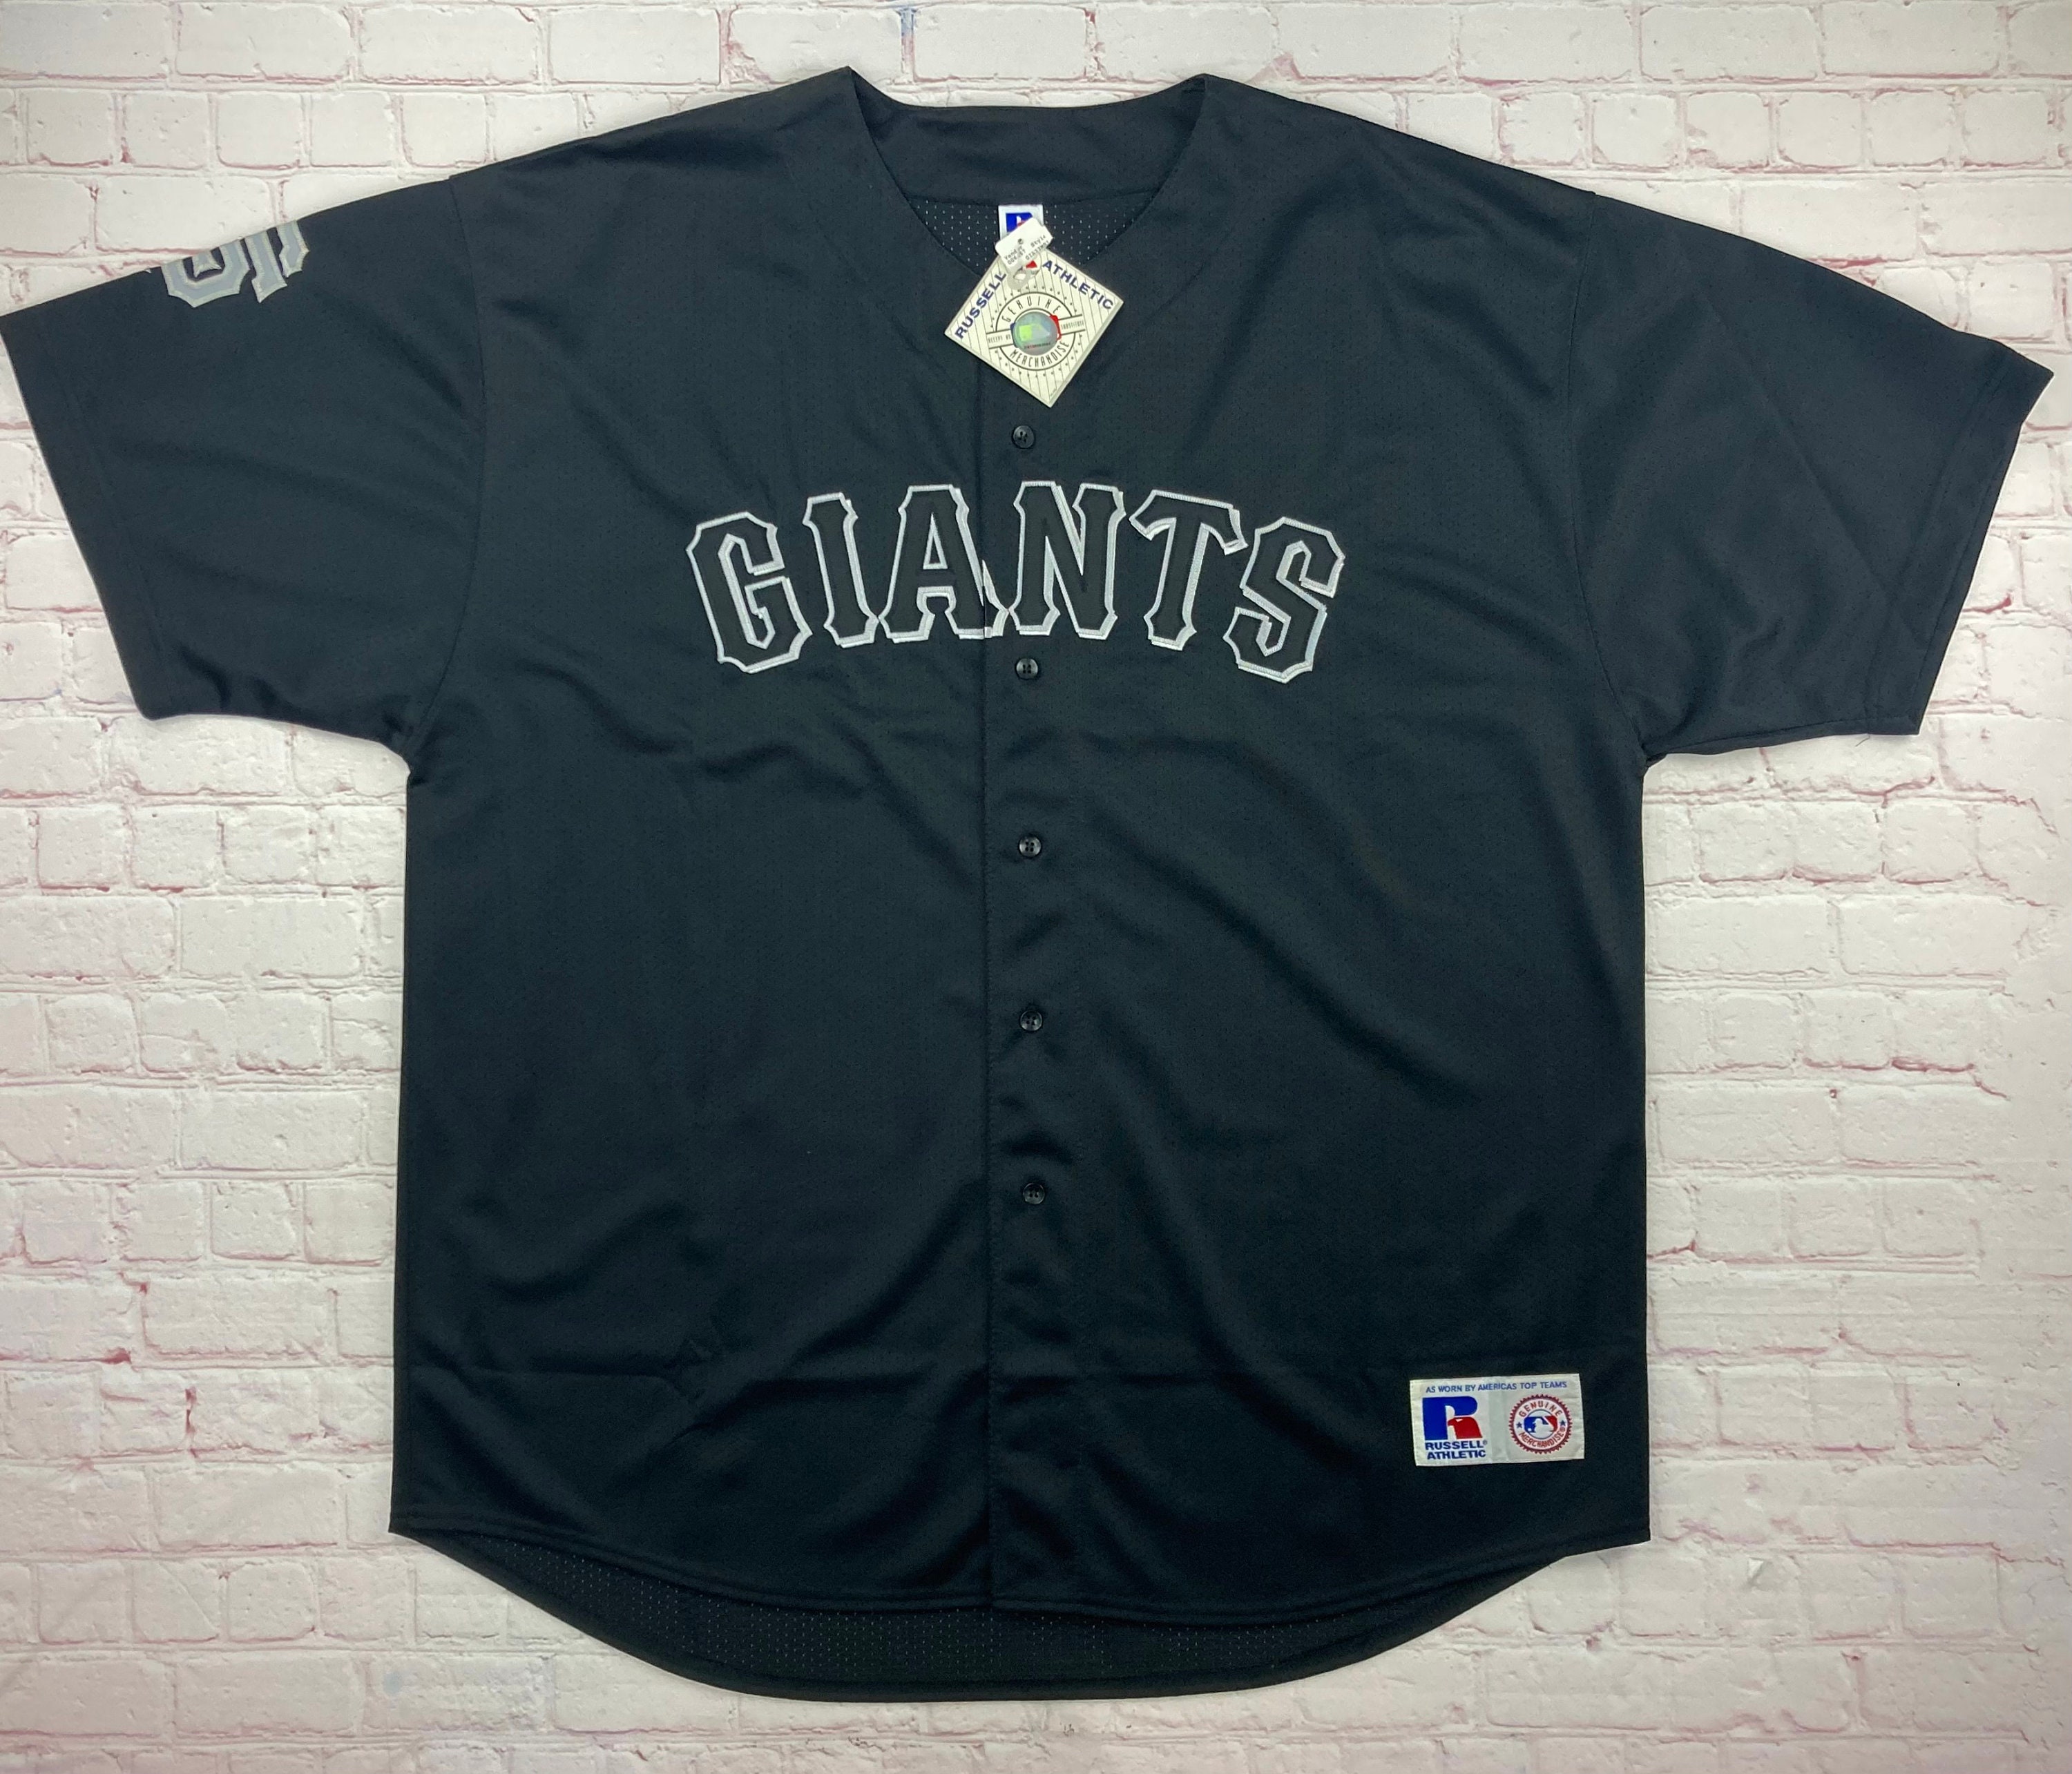 San Francisco Giants Officially Licensed Replica Baseball Jersey T-Shirt  Adult Medium Black : Sports & Outdoors 